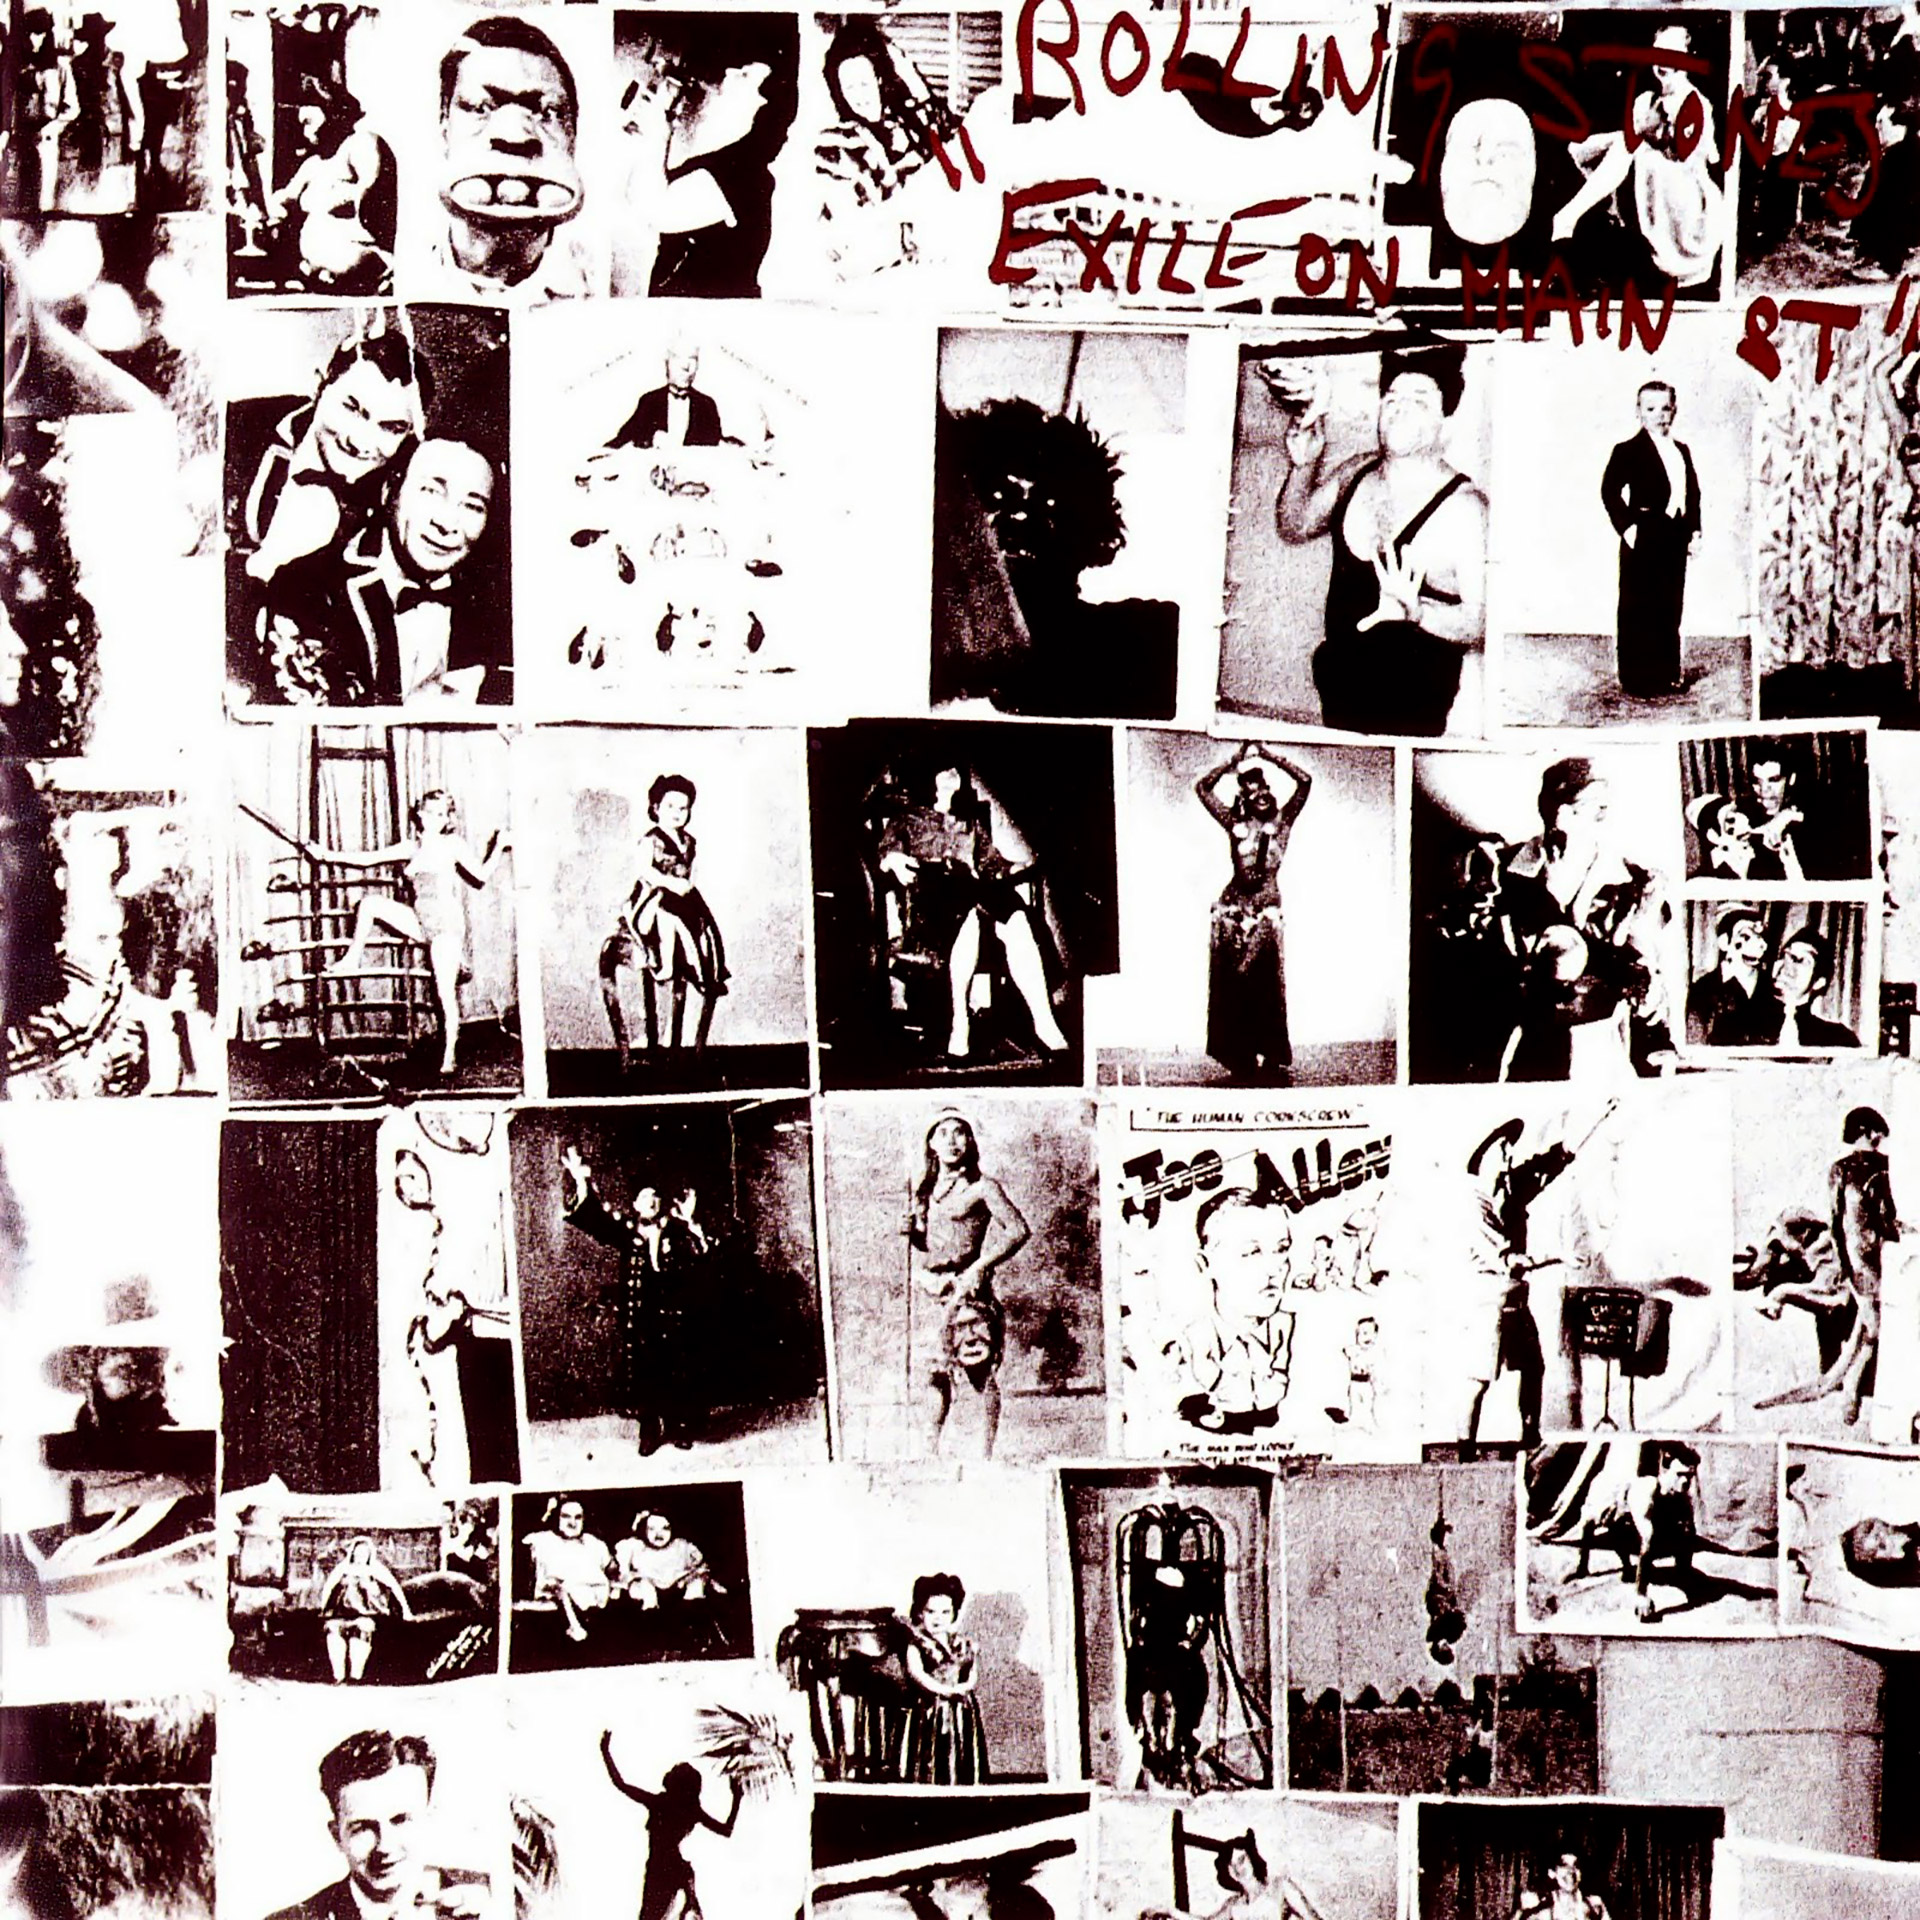 The cover of Exile on Main Street, by the Rolling Stones